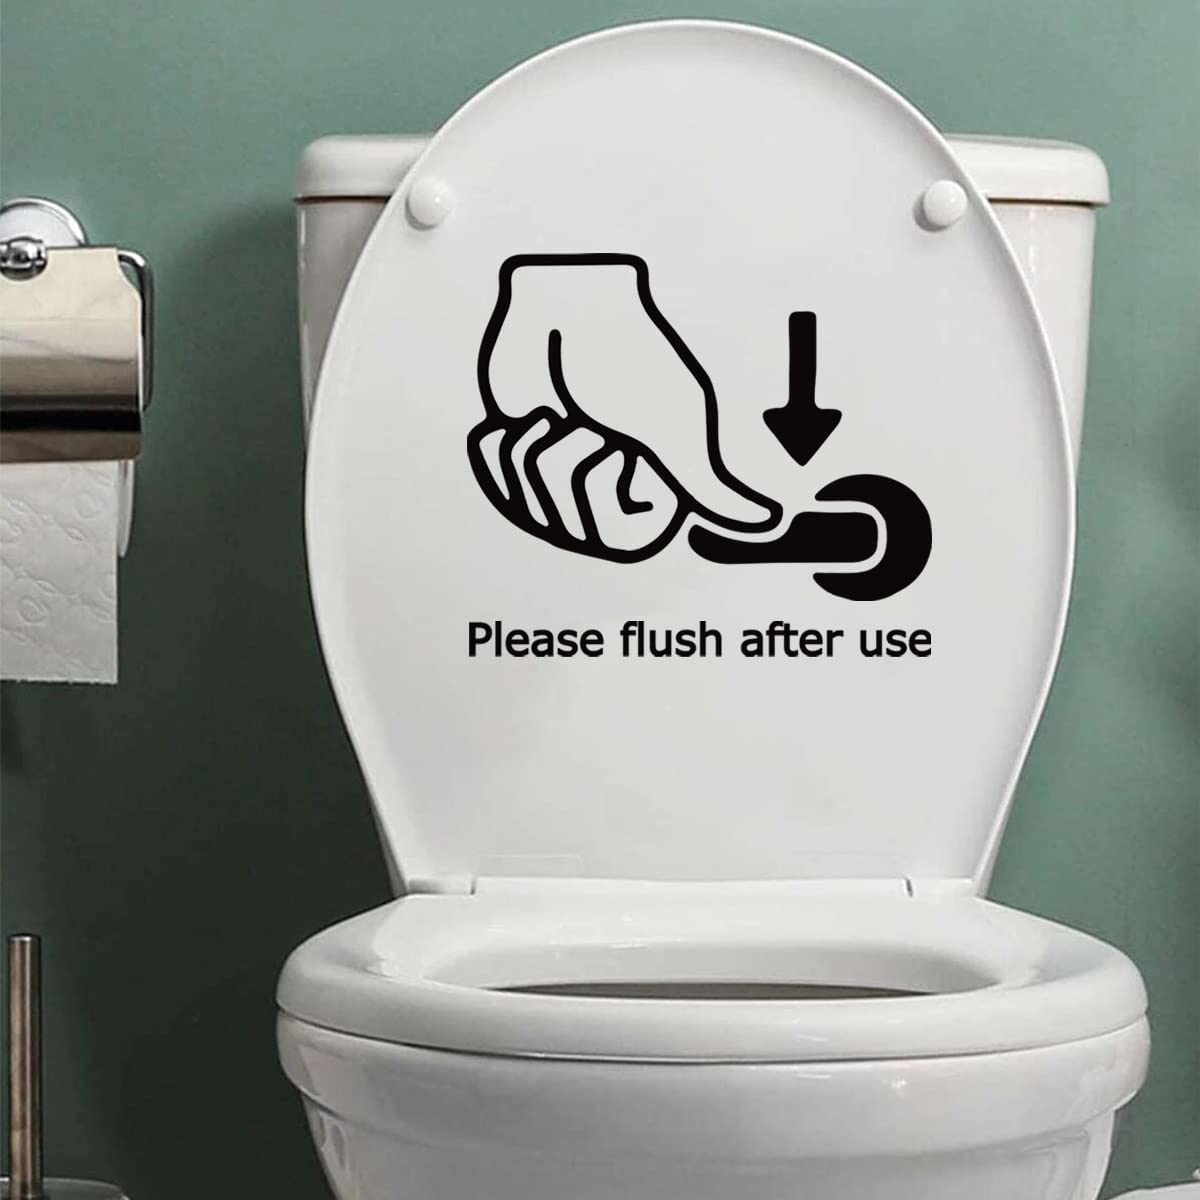 Black hollow toilet seat sticker, (please flush after use)